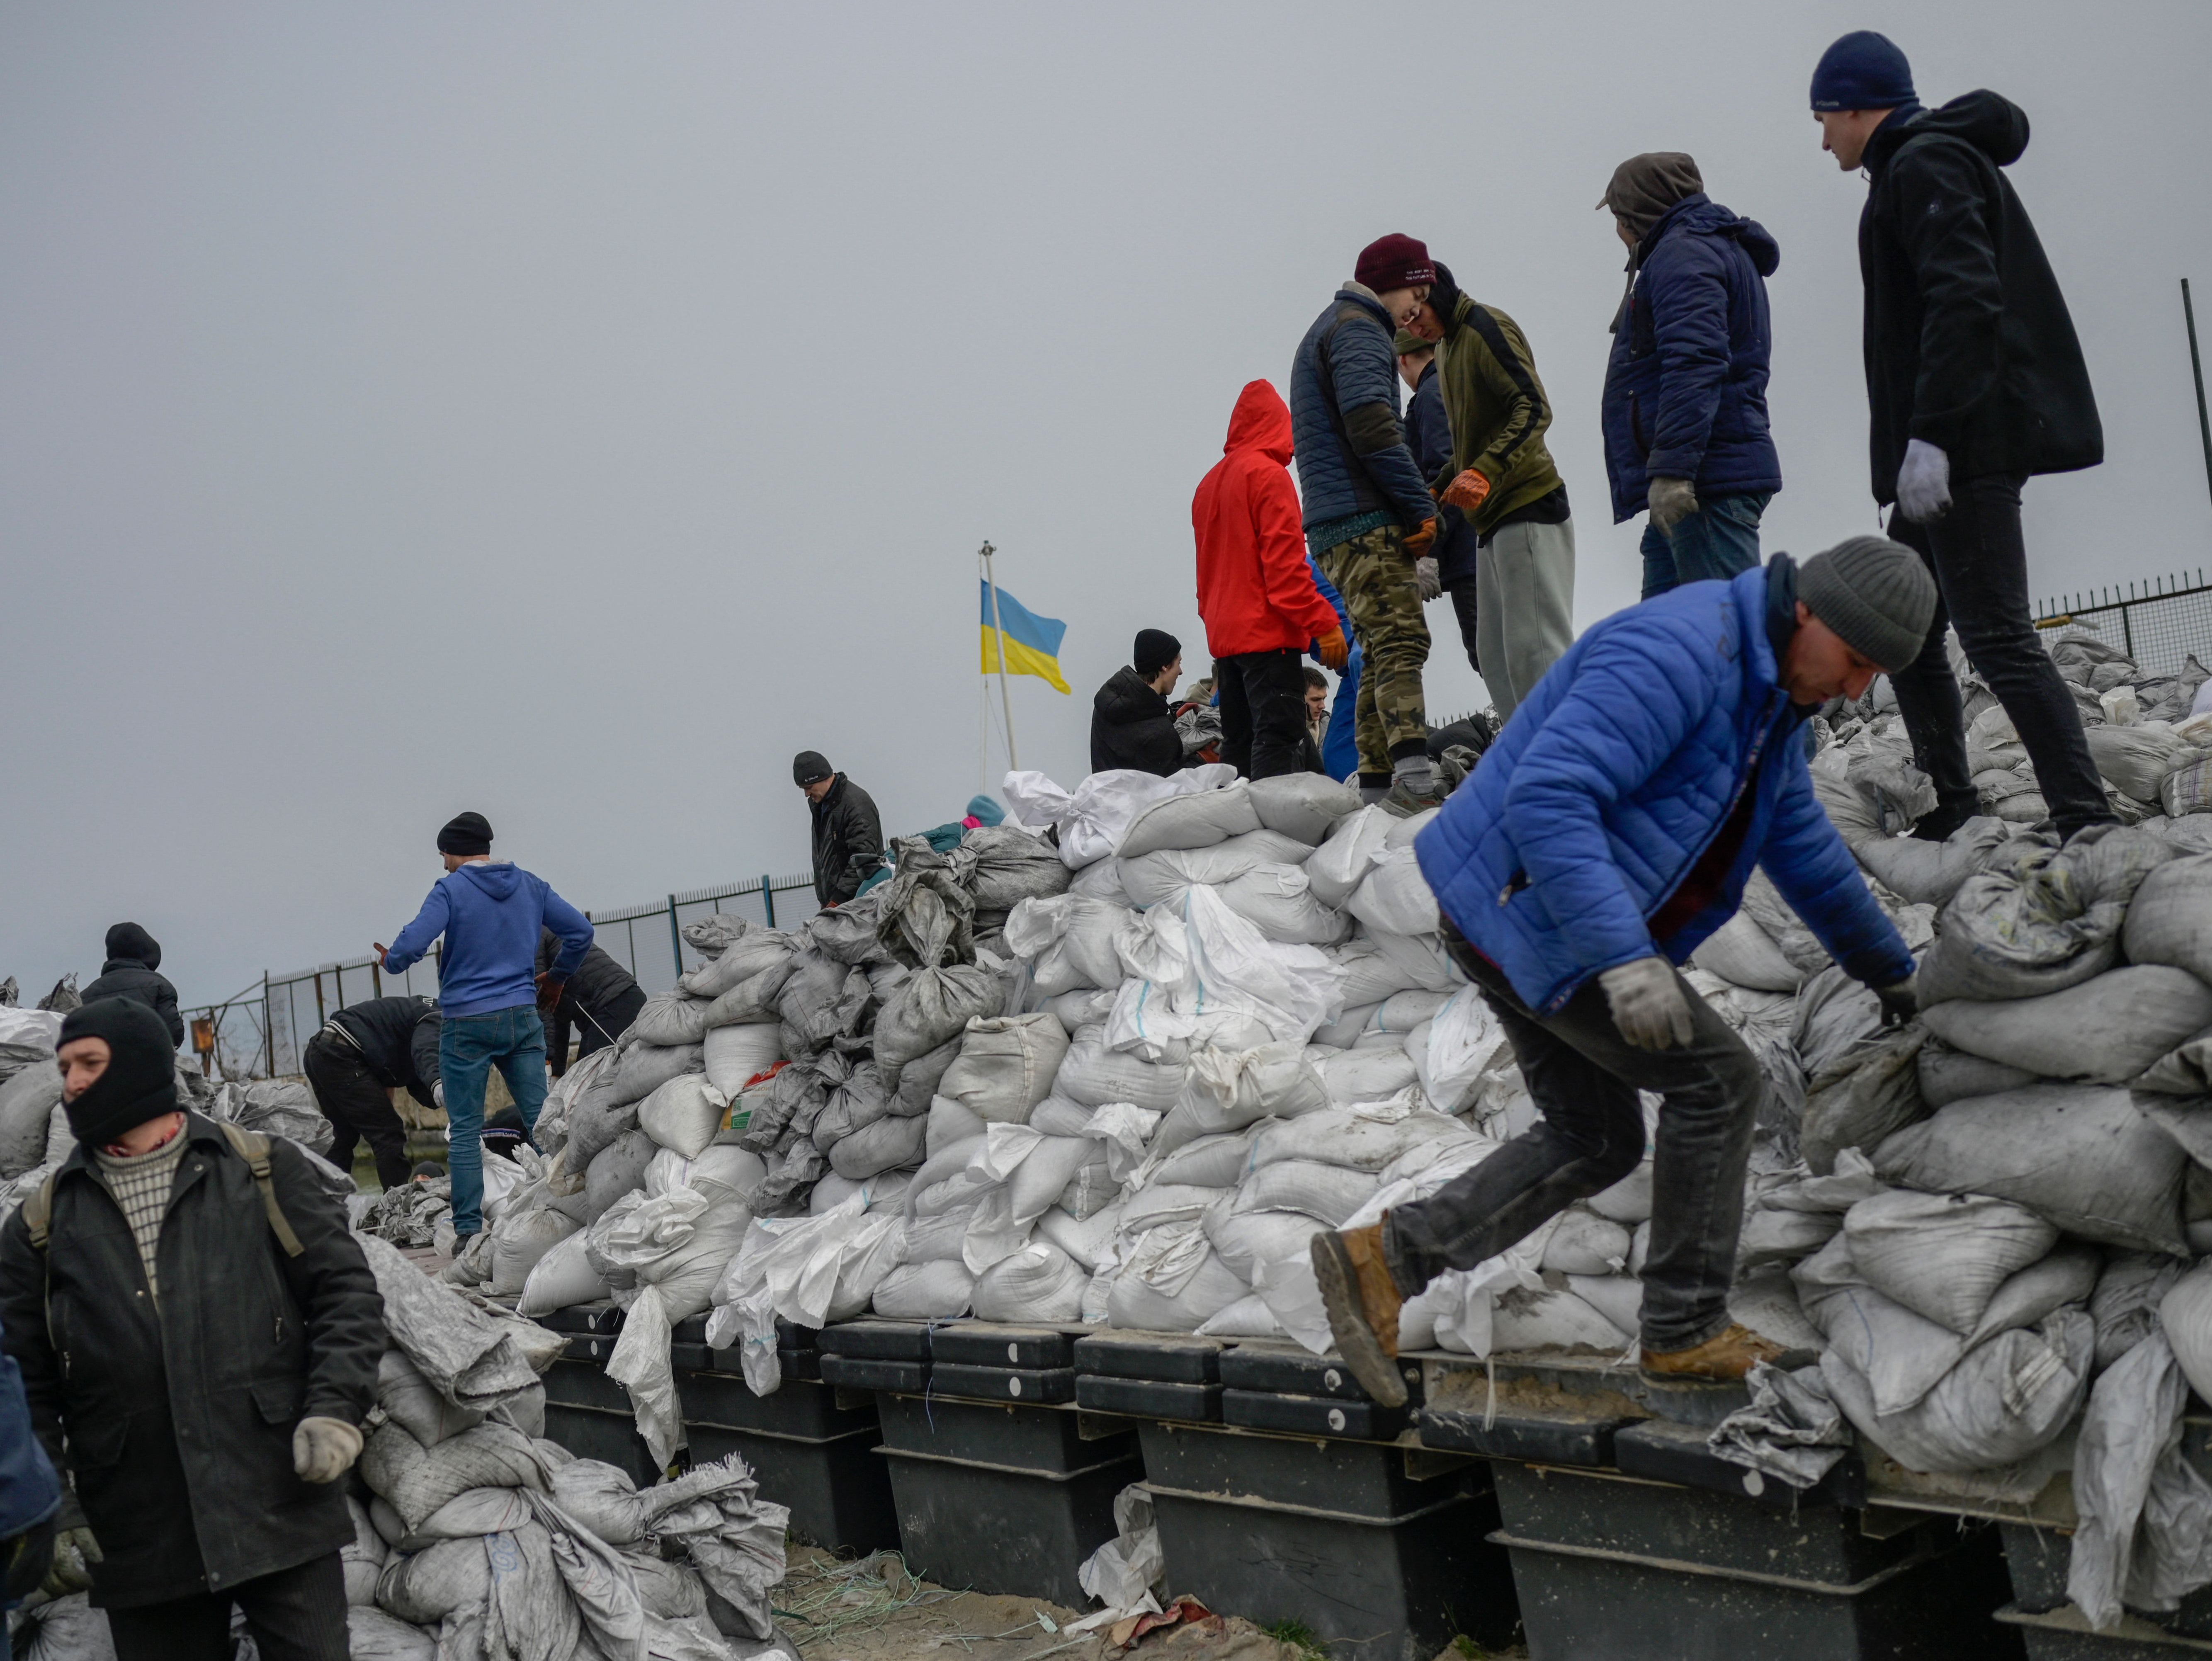 Local residents of the city fill bags with sand to prepare their frontlines against Russian forces